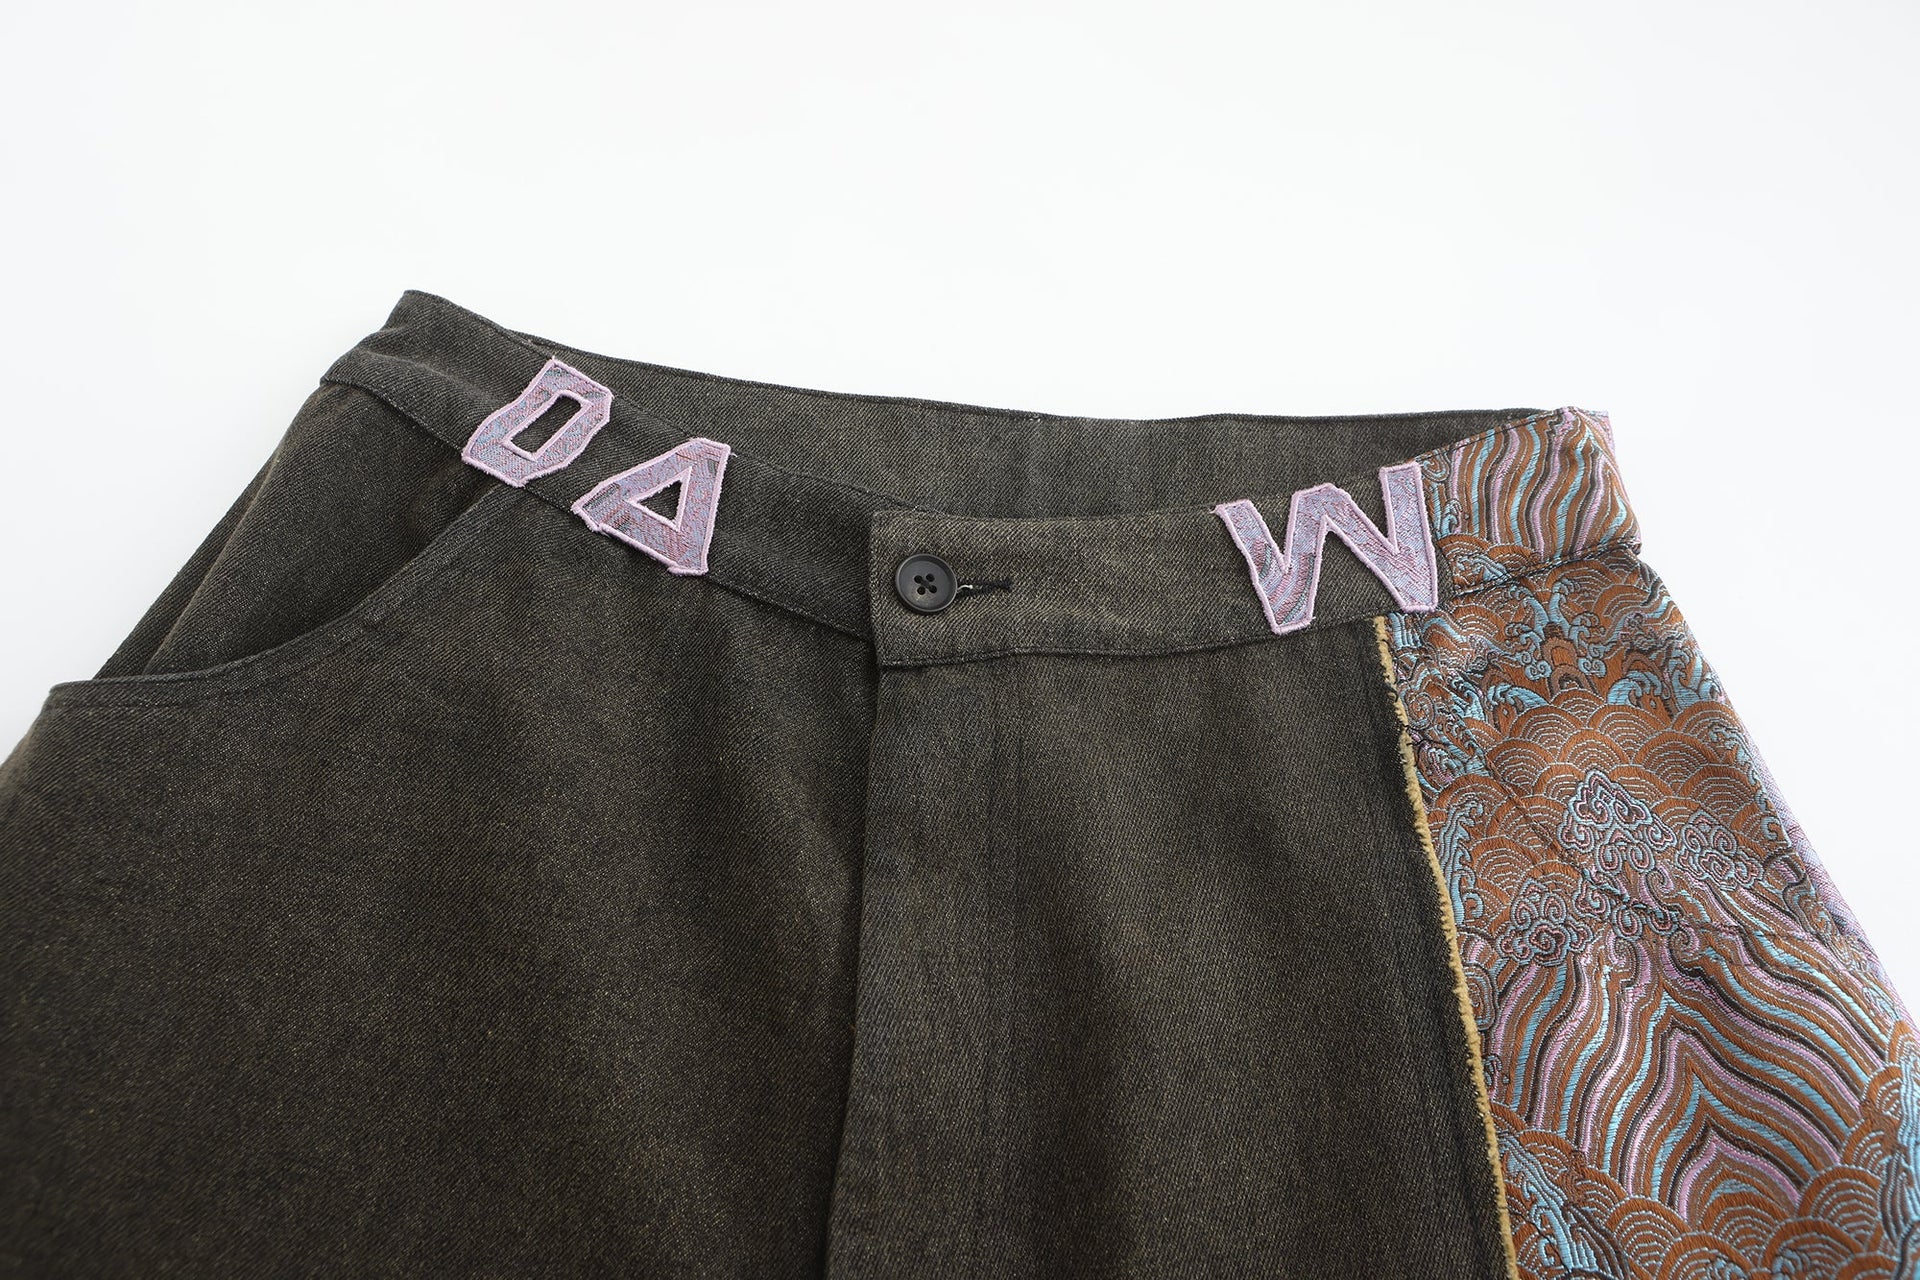 Mid/Low Waist Fit, DA W- Brocade Embroidered Patch Belt Loops, Denim Brocade Patch, up-cycled, renewal, Bleach Dye/Painting, front belt, close up